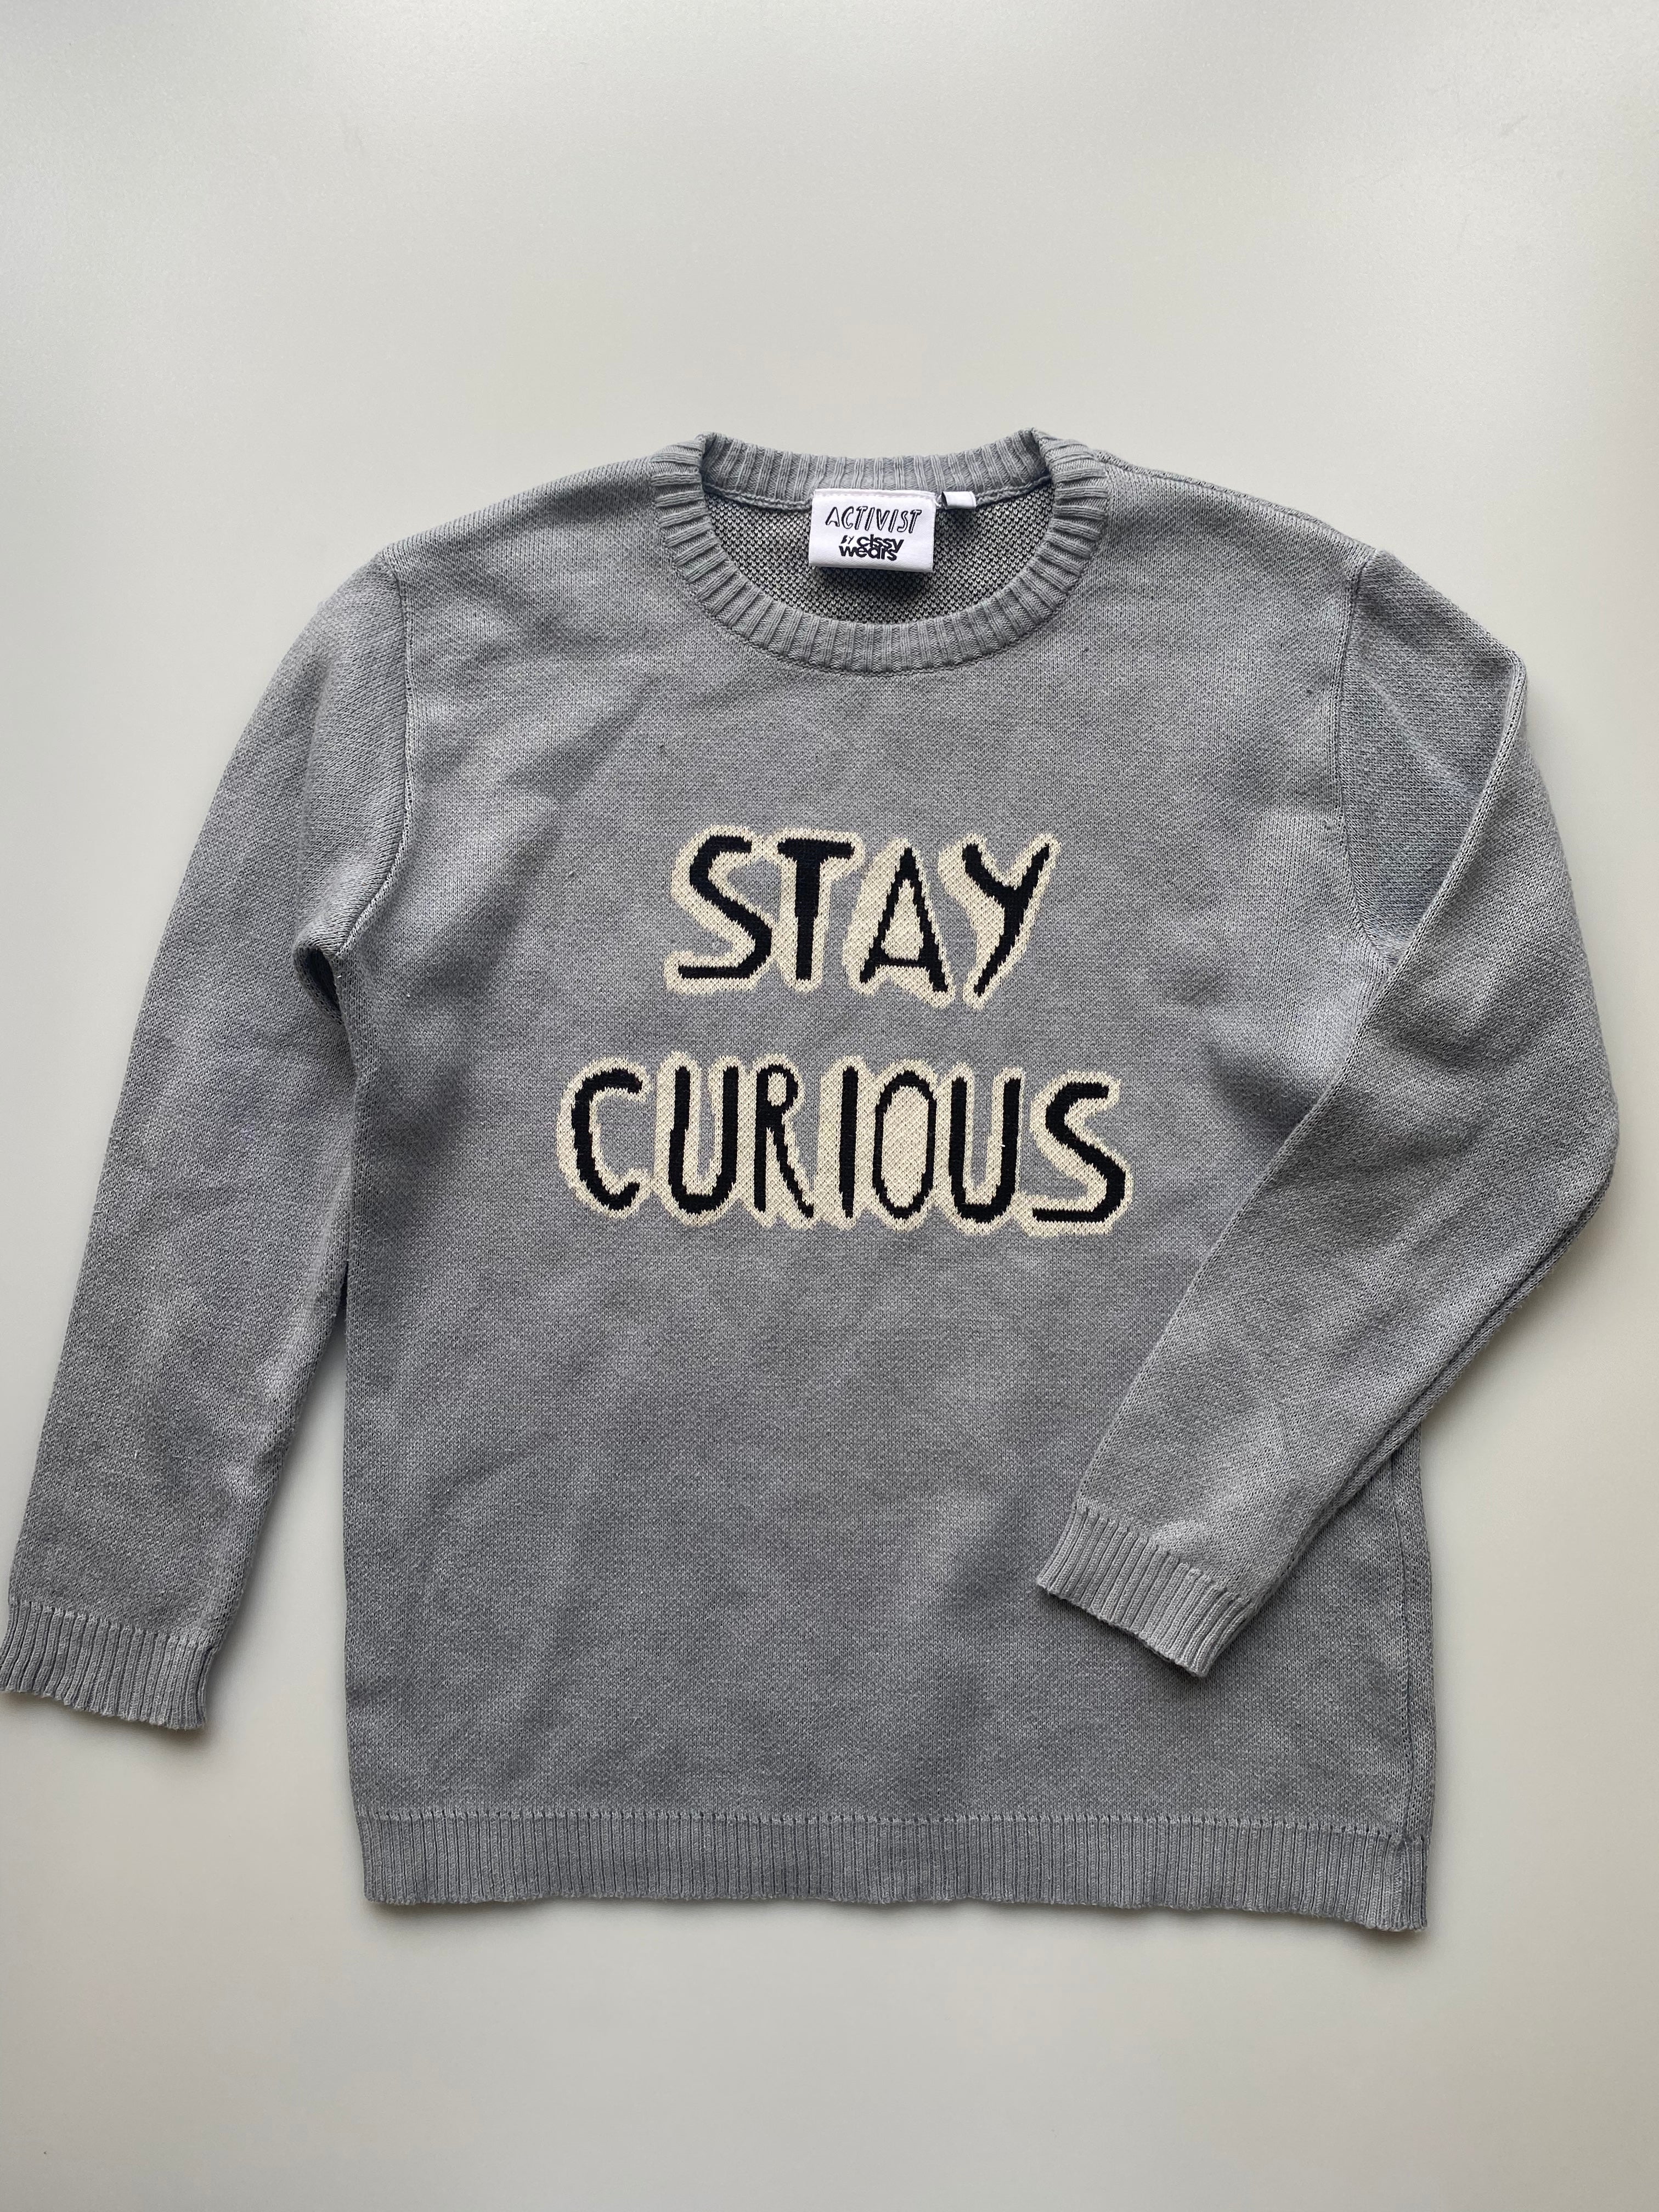 Cissy Wears Stay Curious Jumper Age 7